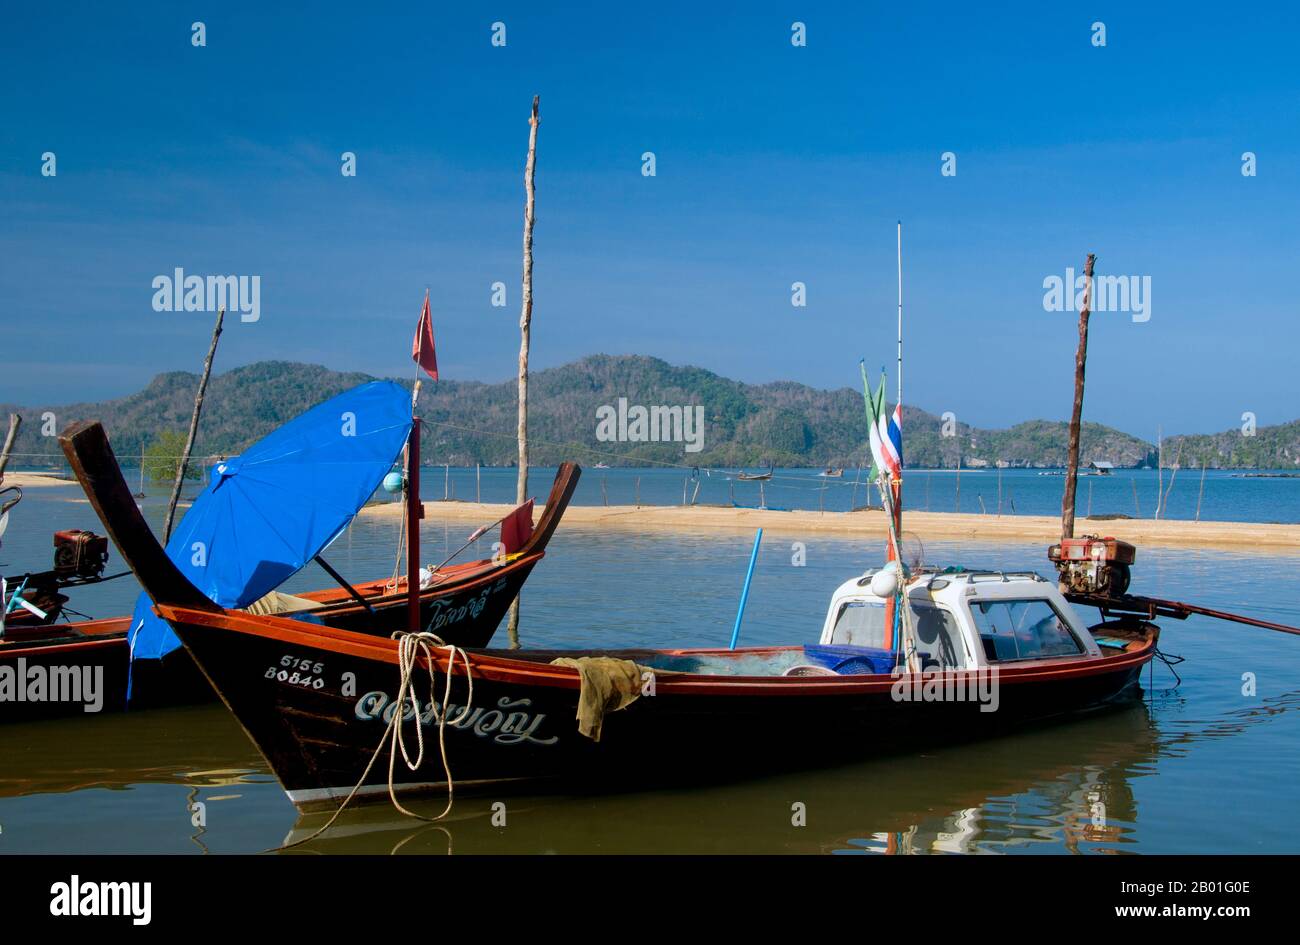 Thailand: Fishing boats, Pak Bara.  Pak Bara is a small seaside town and fishing village in southern Thailand about 60km (37 miles) north-west of the provincial capital of Satun. It serves as a jumping off point for visits to Mu Ko Phetra Marine National Park and Ko Tarutao Marine National Park. Stock Photo